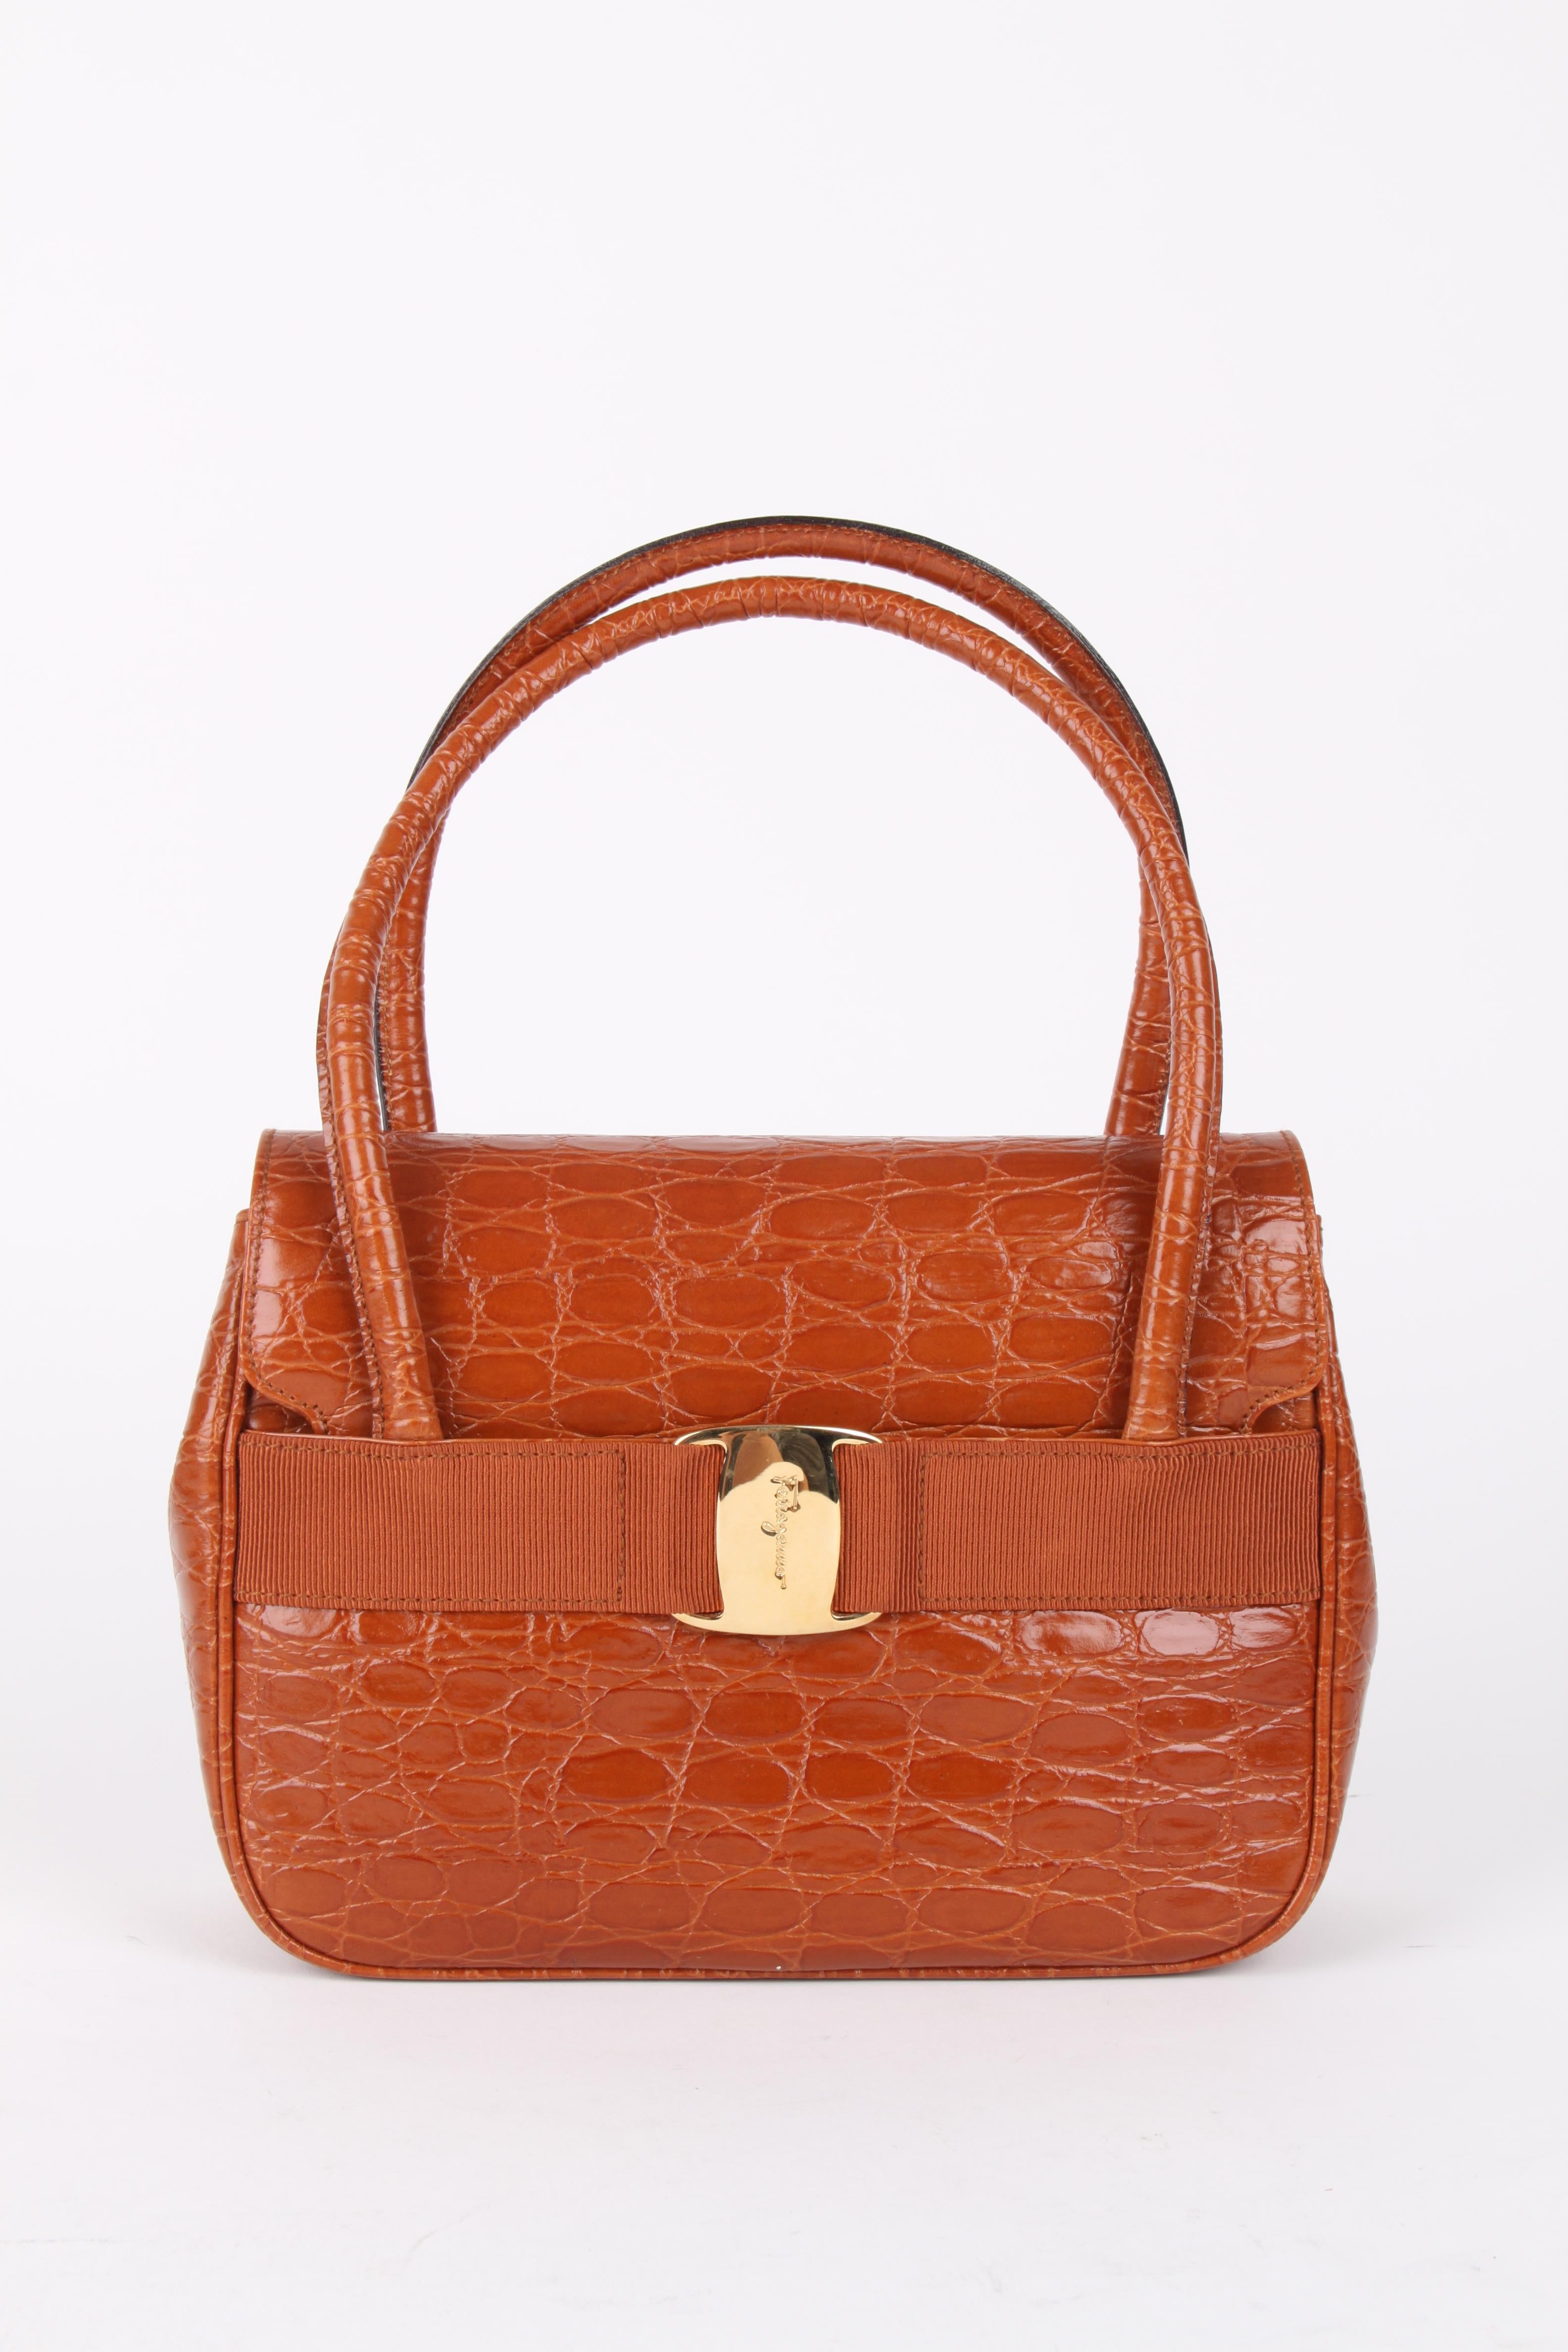 Salvatore Ferragamo Crocodile Embossed Crossbody Bag.

 Brown leather gold-tone hardware with logo stamp on the front with grosgrain trim, leather crossbody strap and top zip closure. The interior is fully lined in jacquard lining featuring a slip